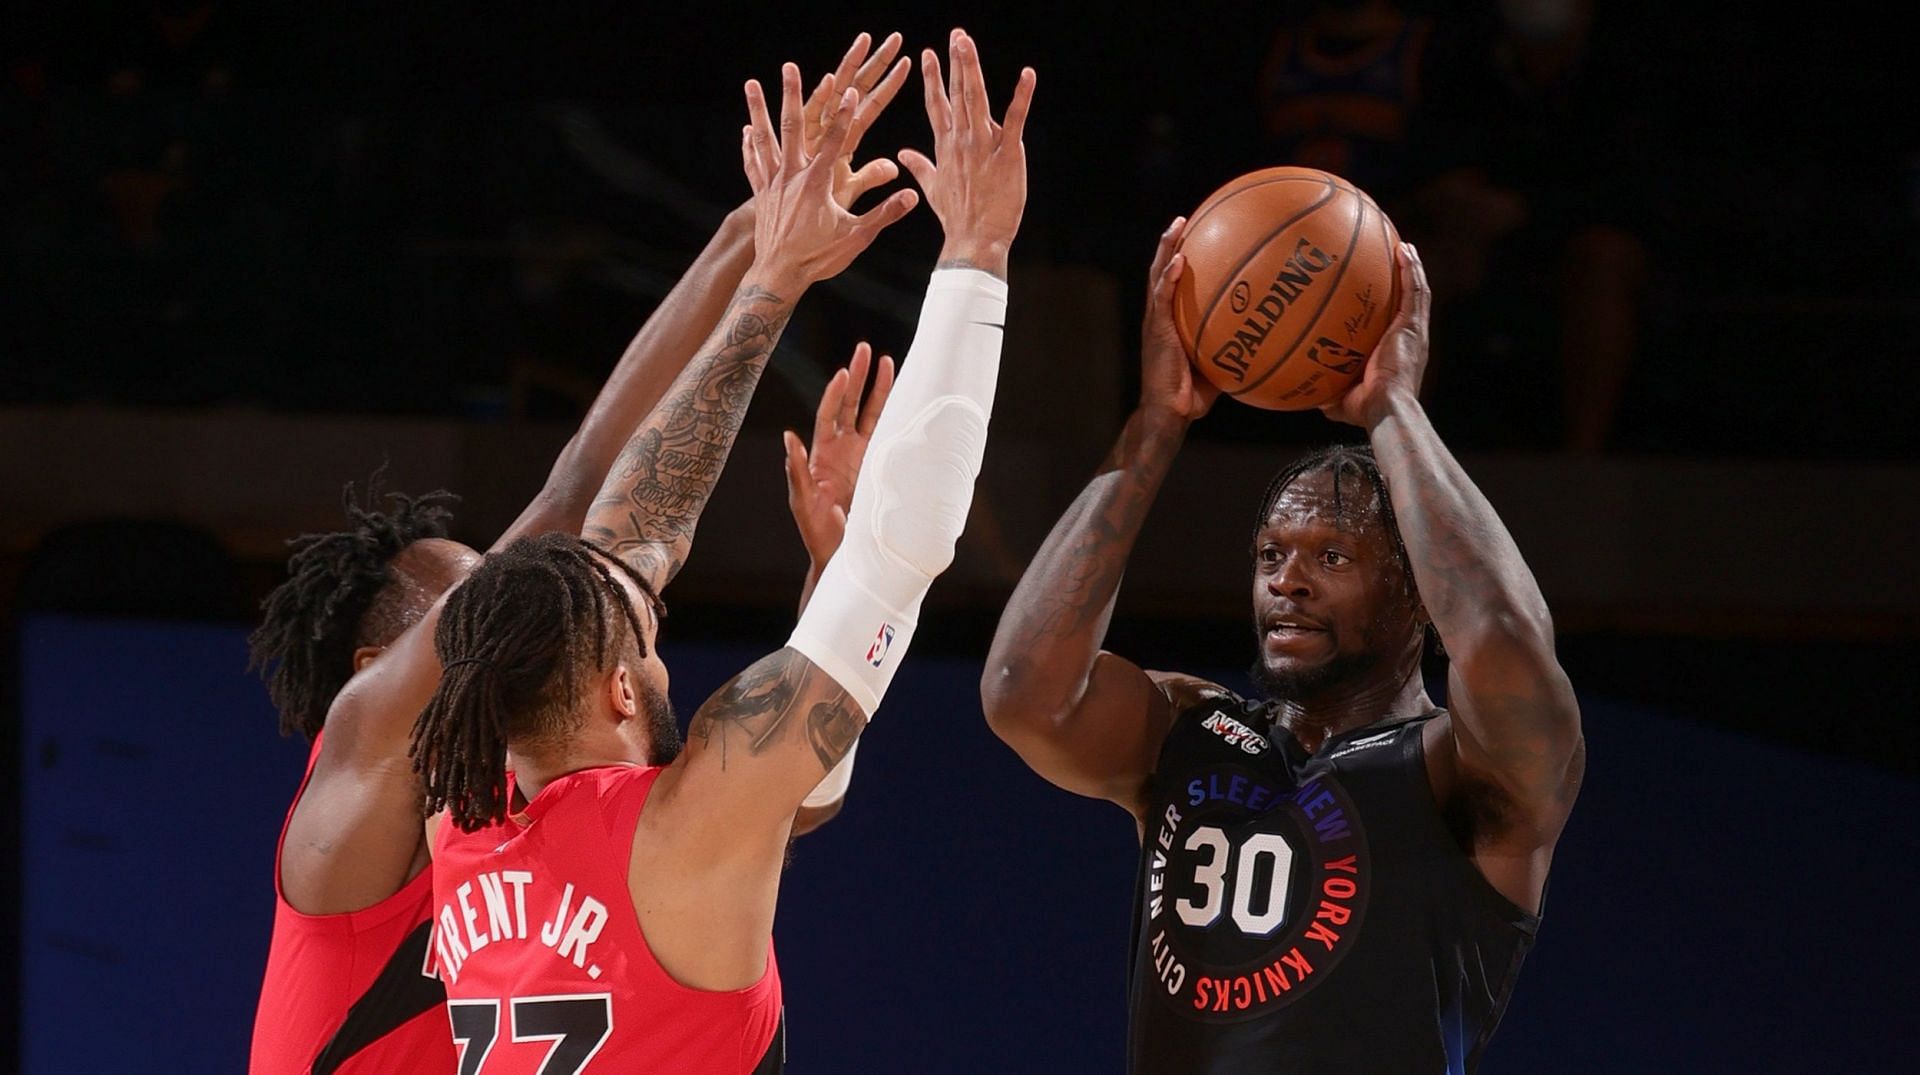 The depleted Toronto Raptors will try to go up 2-0 this season against the New York Knicks on Friday [Photo: NBA.com]